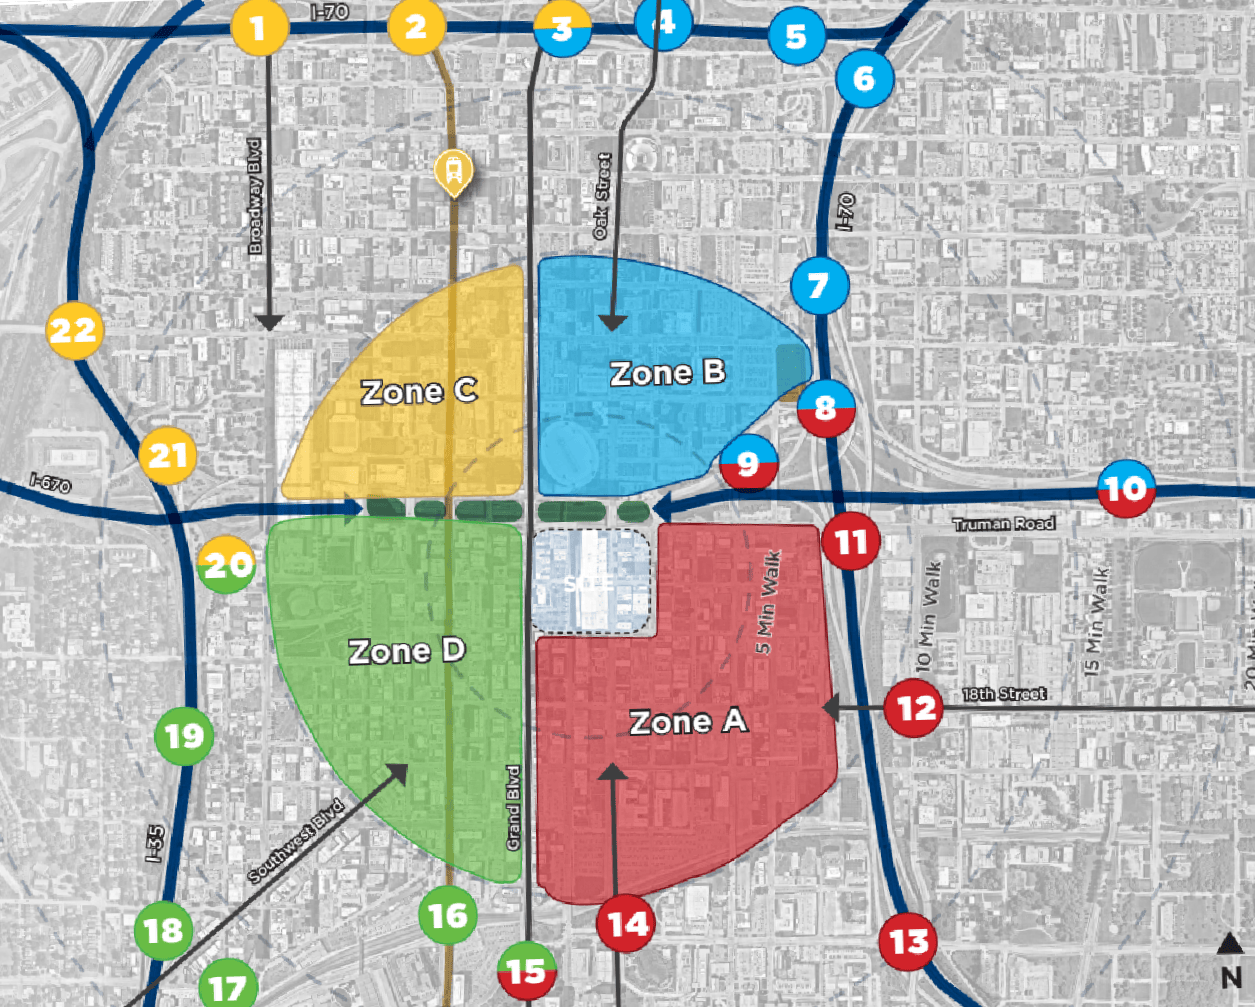 A map showing access points and parking zones for a new Royals ballpark in the East Crossroads.